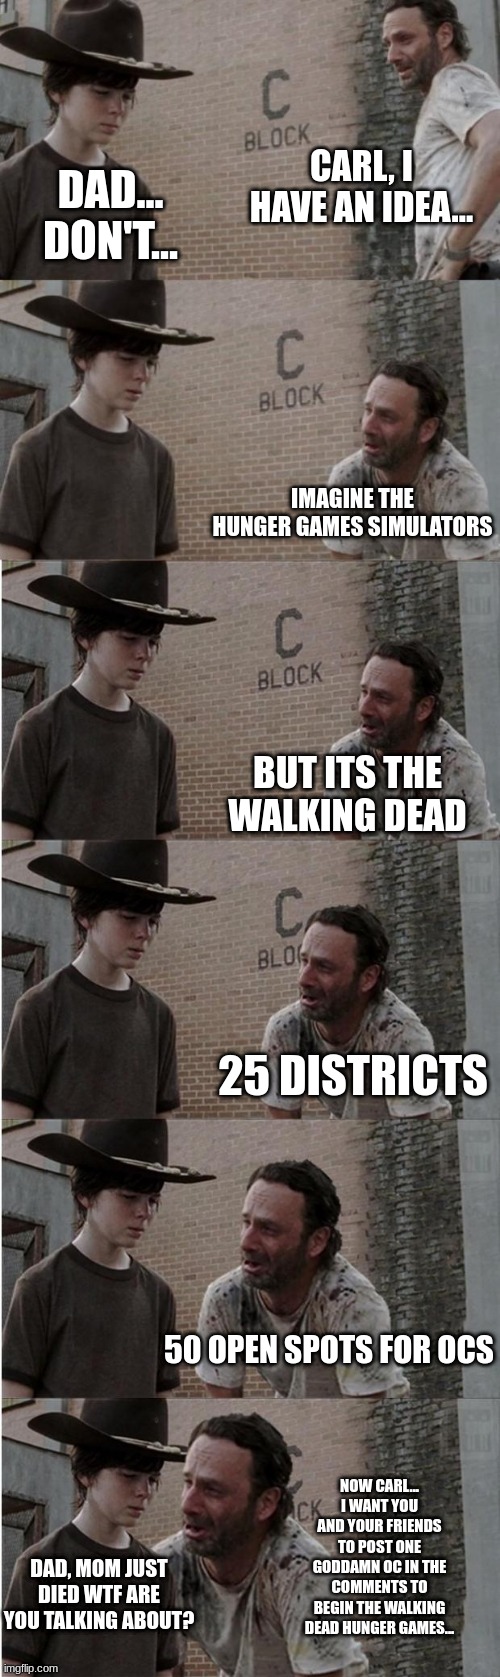 https://imgflip.com/memegenerator/359758394/Walking-Dead-Carol-but-its-longer New template! I know, I spelled carls name as caro | CARL, I HAVE AN IDEA... DAD... DON'T... IMAGINE THE HUNGER GAMES SIMULATORS; BUT ITS THE WALKING DEAD; 25 DISTRICTS; 50 OPEN SPOTS FOR OCS; NOW CARL... I WANT YOU AND YOUR FRIENDS TO POST ONE GODDAMN OC IN THE COMMENTS TO BEGIN THE WALKING DEAD HUNGER GAMES... DAD, MOM JUST DIED WTF ARE YOU TALKING ABOUT? | image tagged in hunger games,walking dead,simulation,1 oc in the comments,2 if i say so,share this image in memechat | made w/ Imgflip meme maker